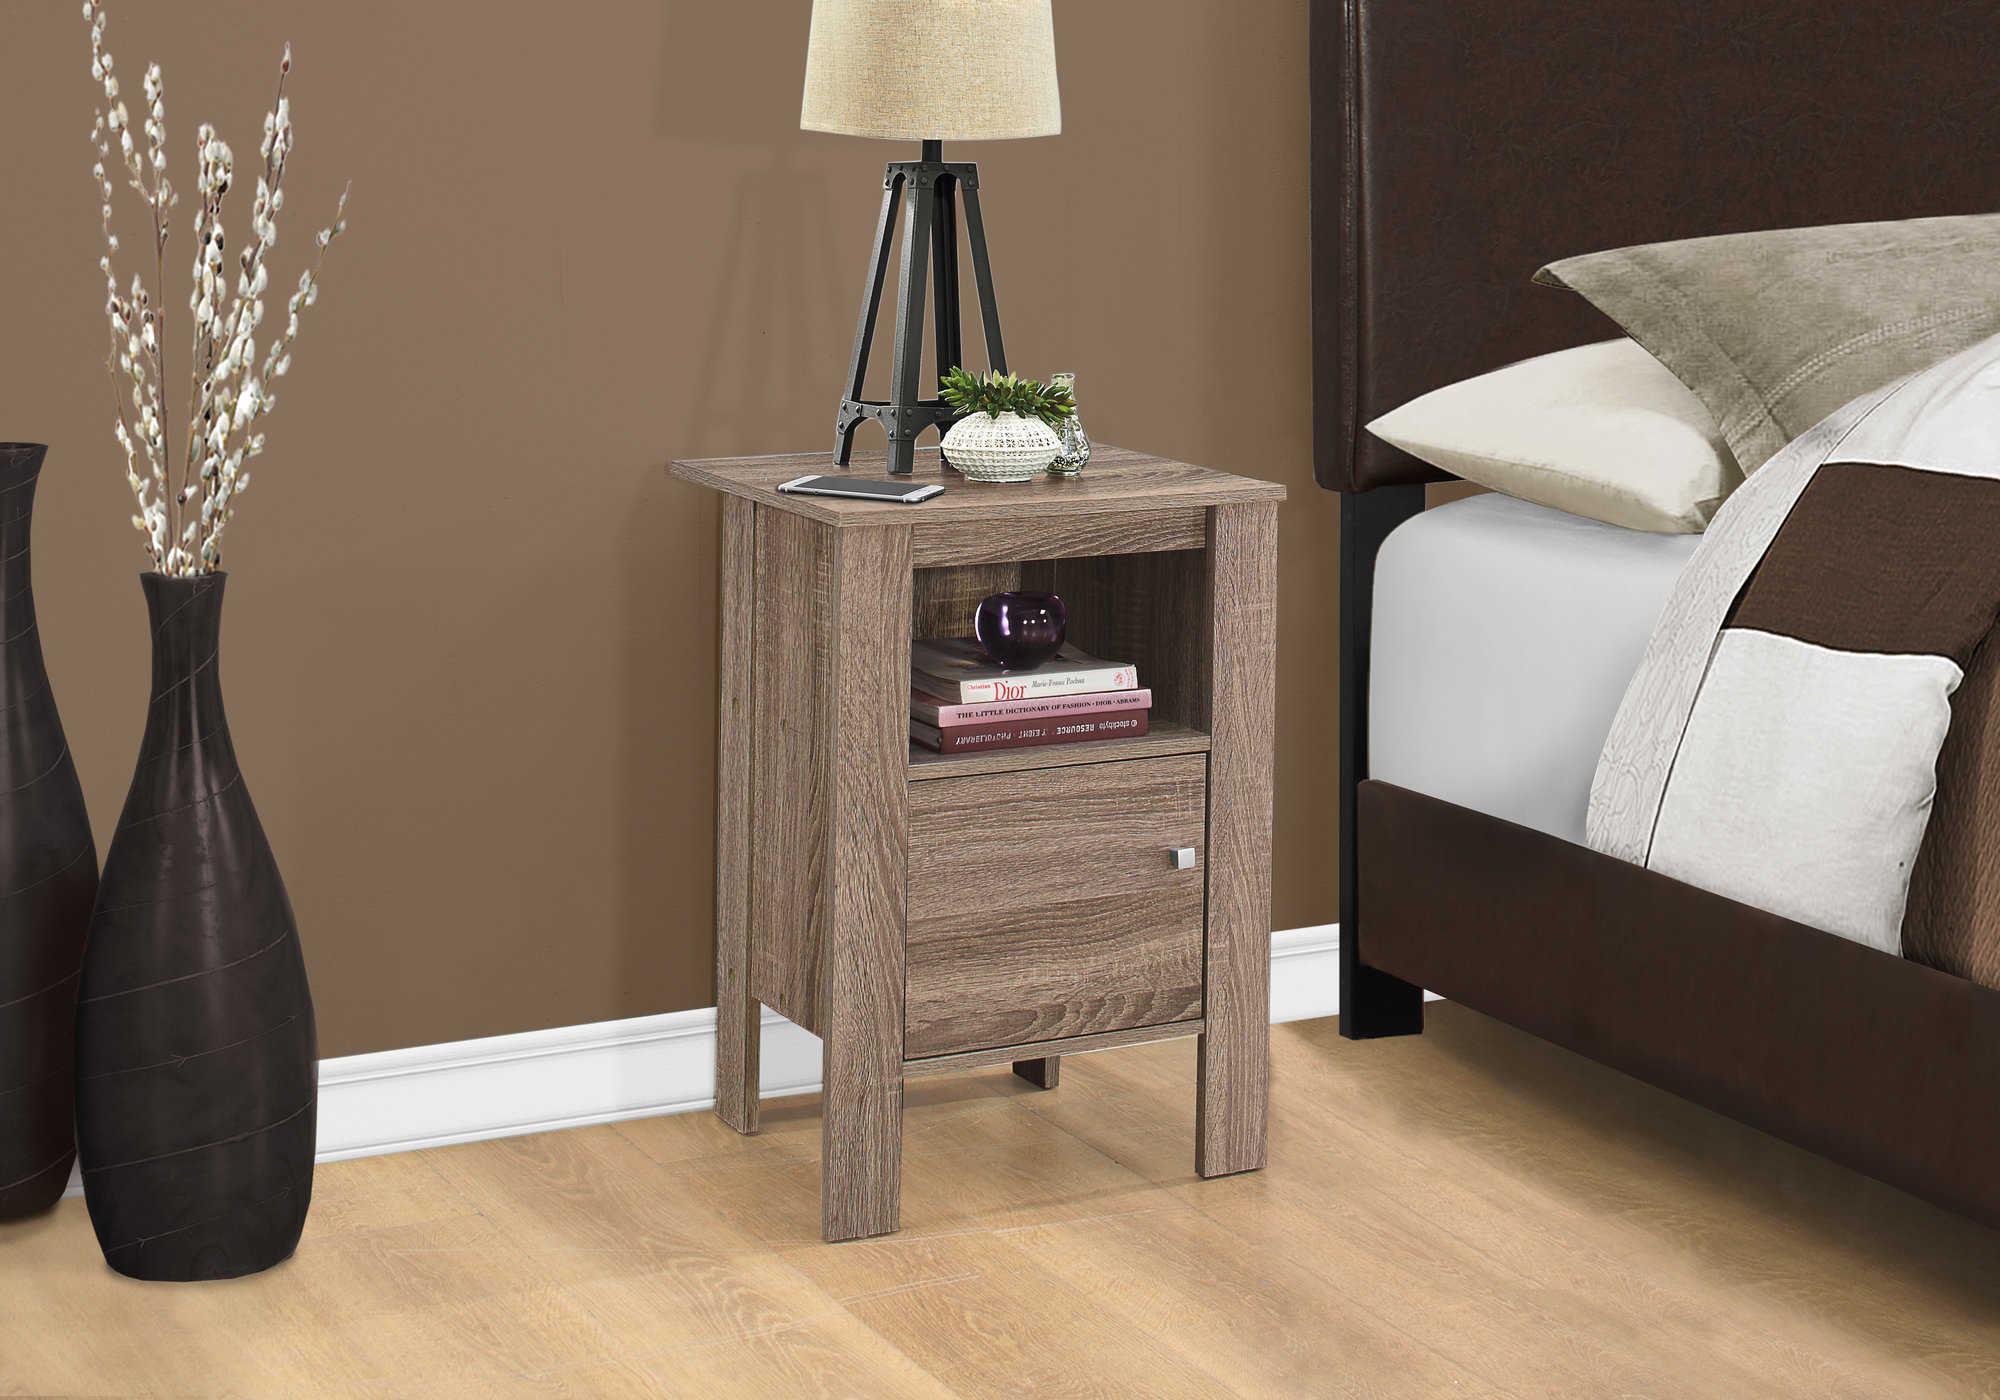 BEDROOM NIGHTSTAND - DARK TAUPE NIGHT STAND WITH STORAGE